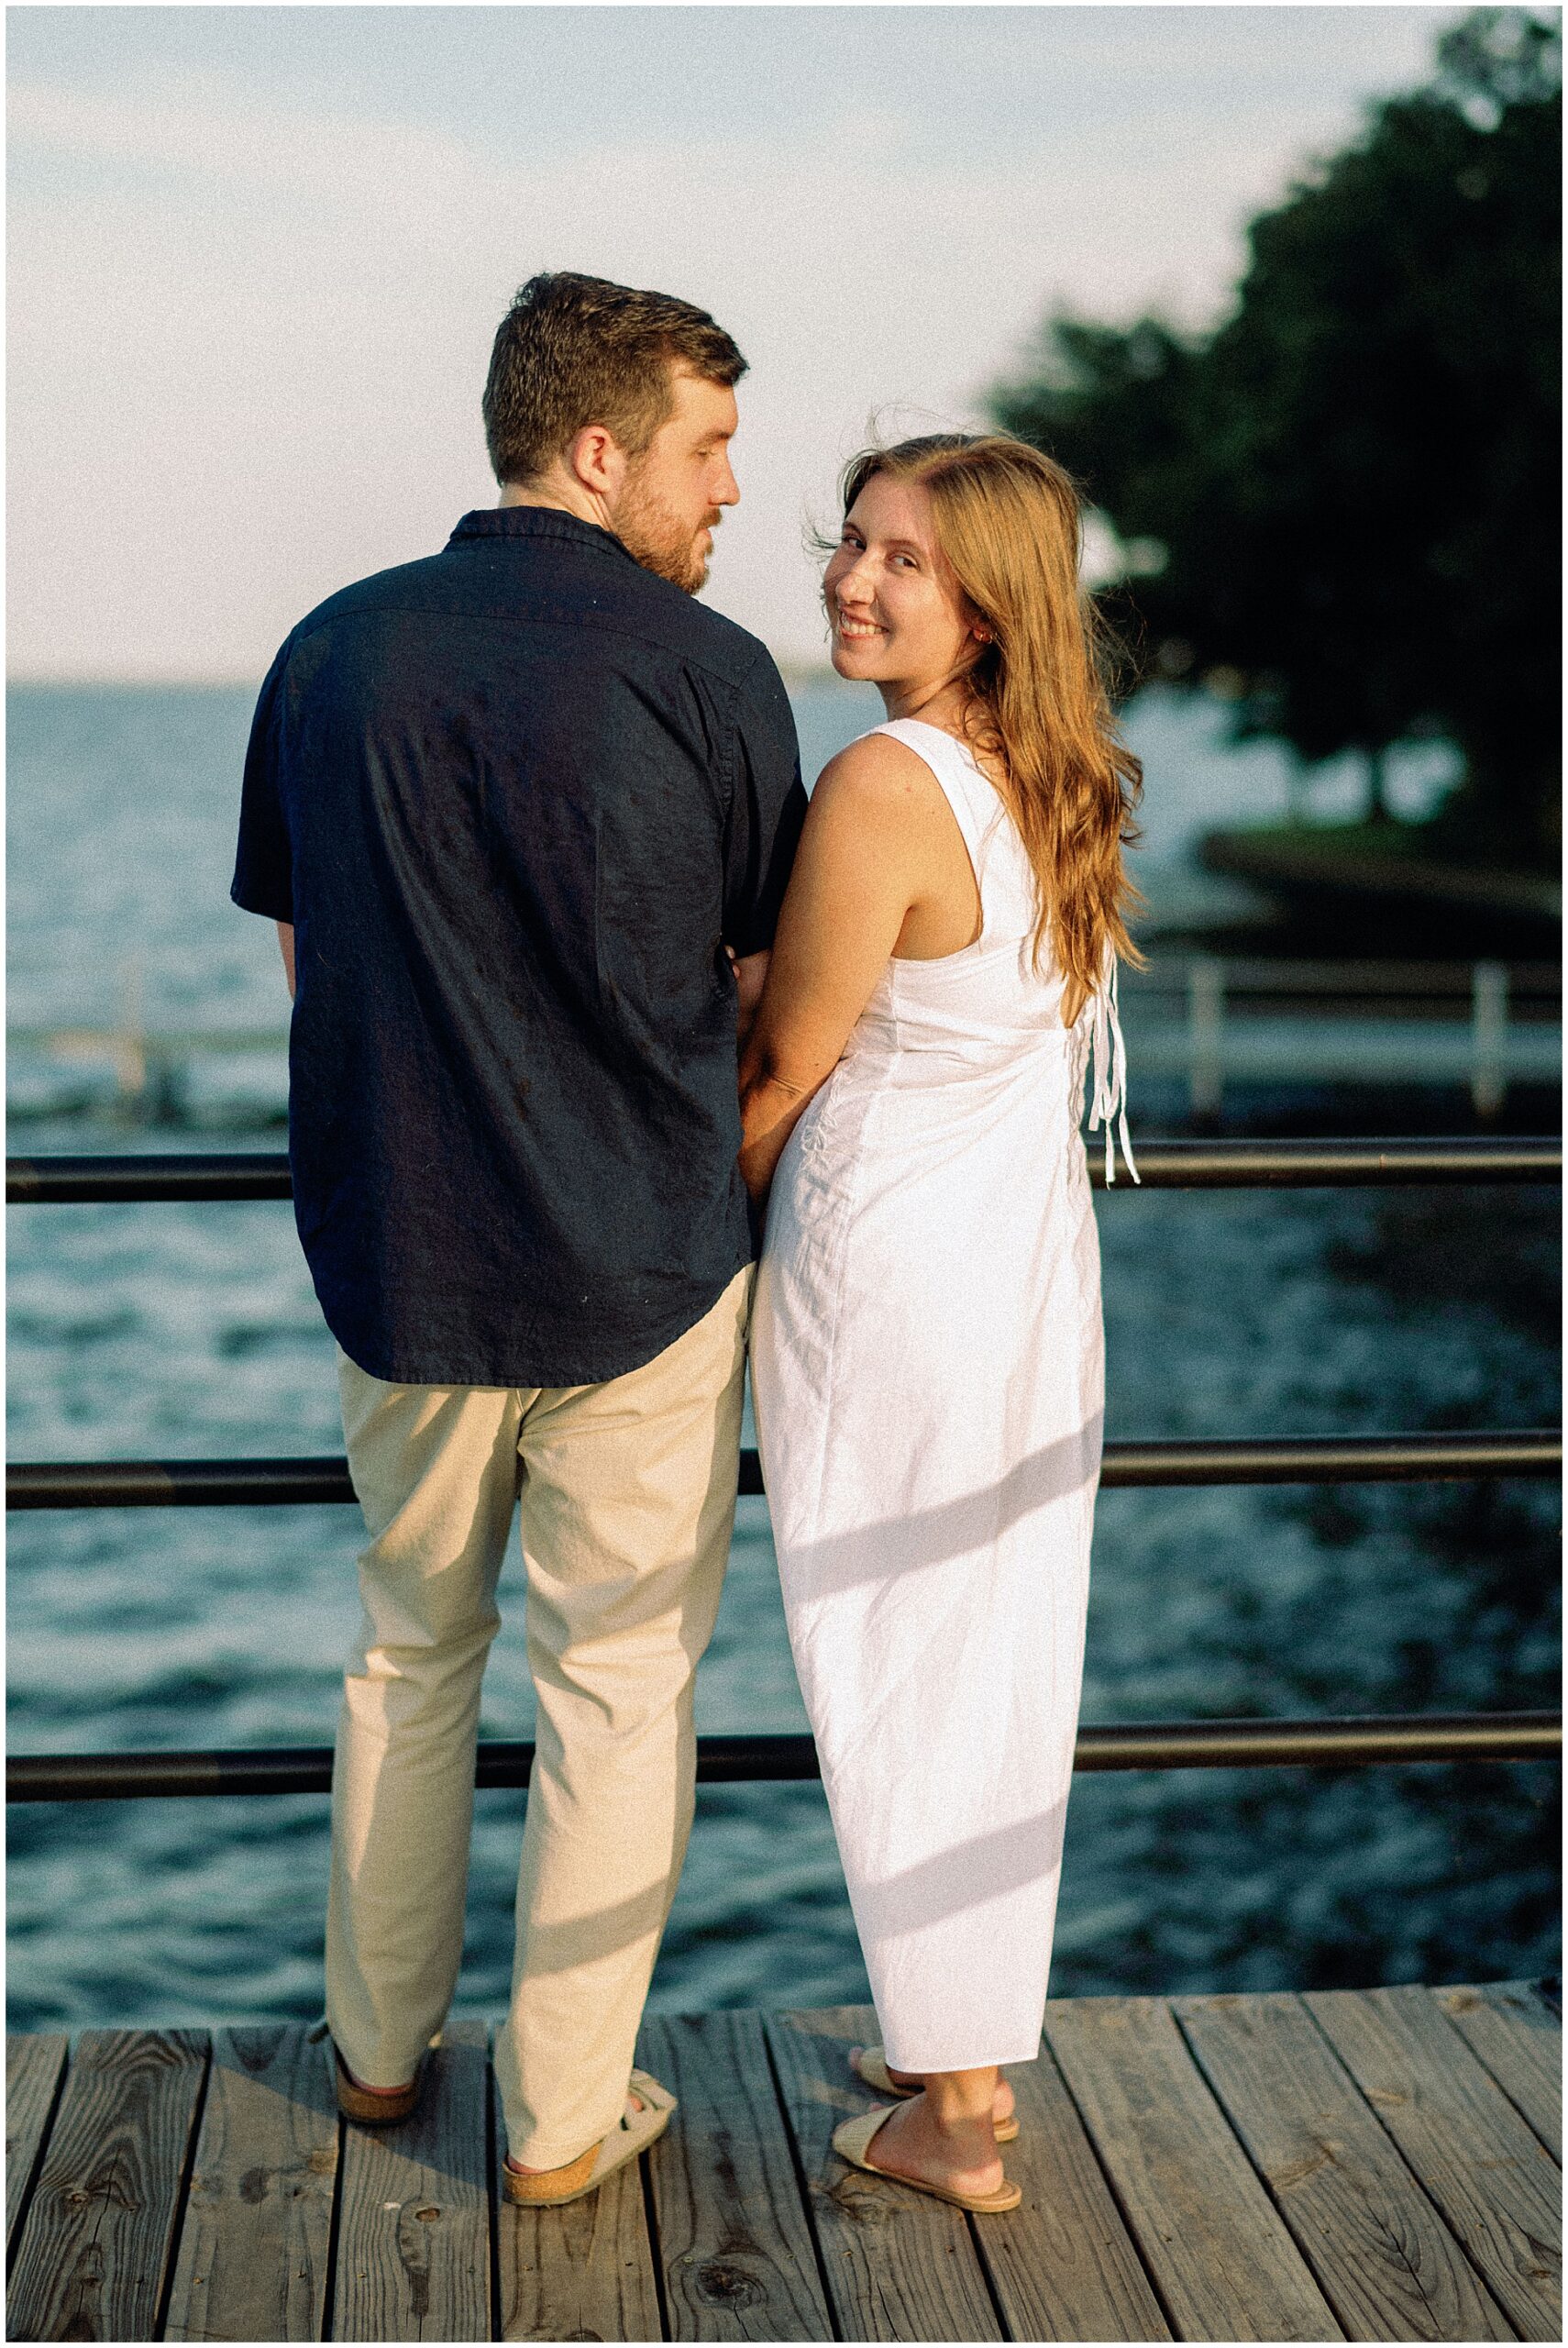 Candid shot of Samantha and Jordan laughing together at the lake house for their engagement session